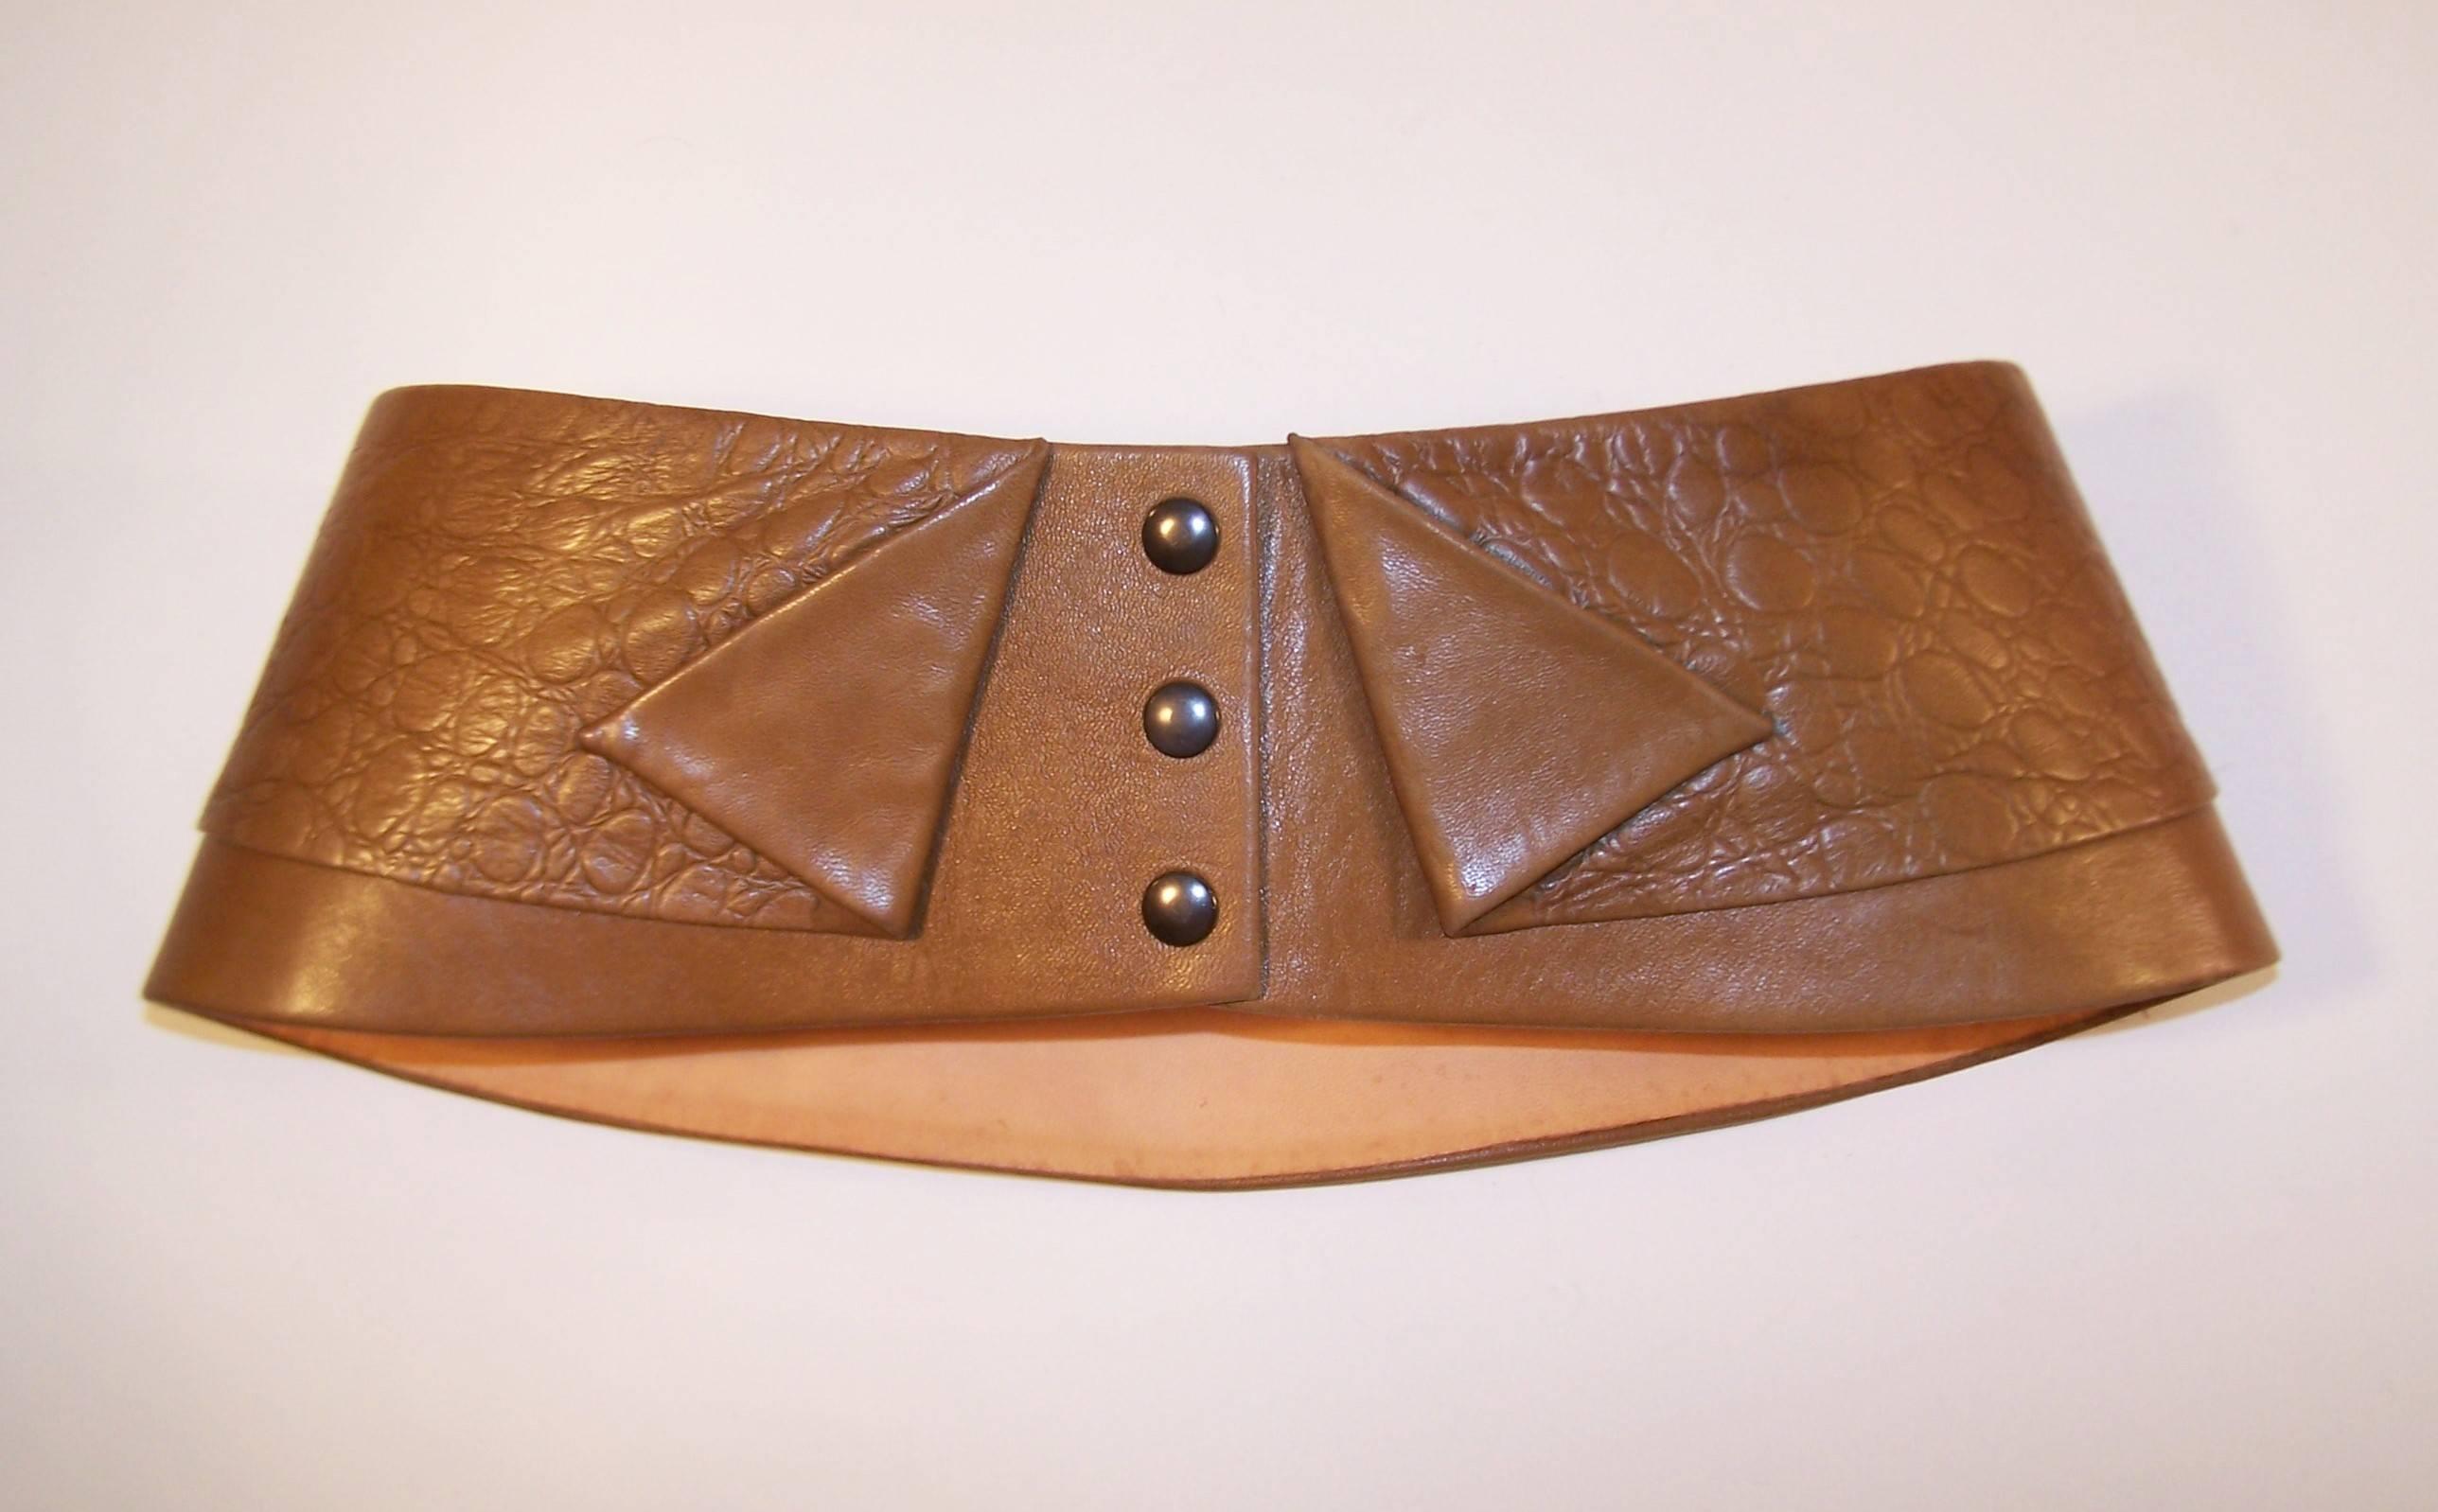 Belts are the perfect accessory to complete a fashionable 'look' and this 1980's corset belt from Lasso of France promises to be the icing on the cake.  It is designed with a supple camel color leather that has a hint of olive undertones.  It snaps